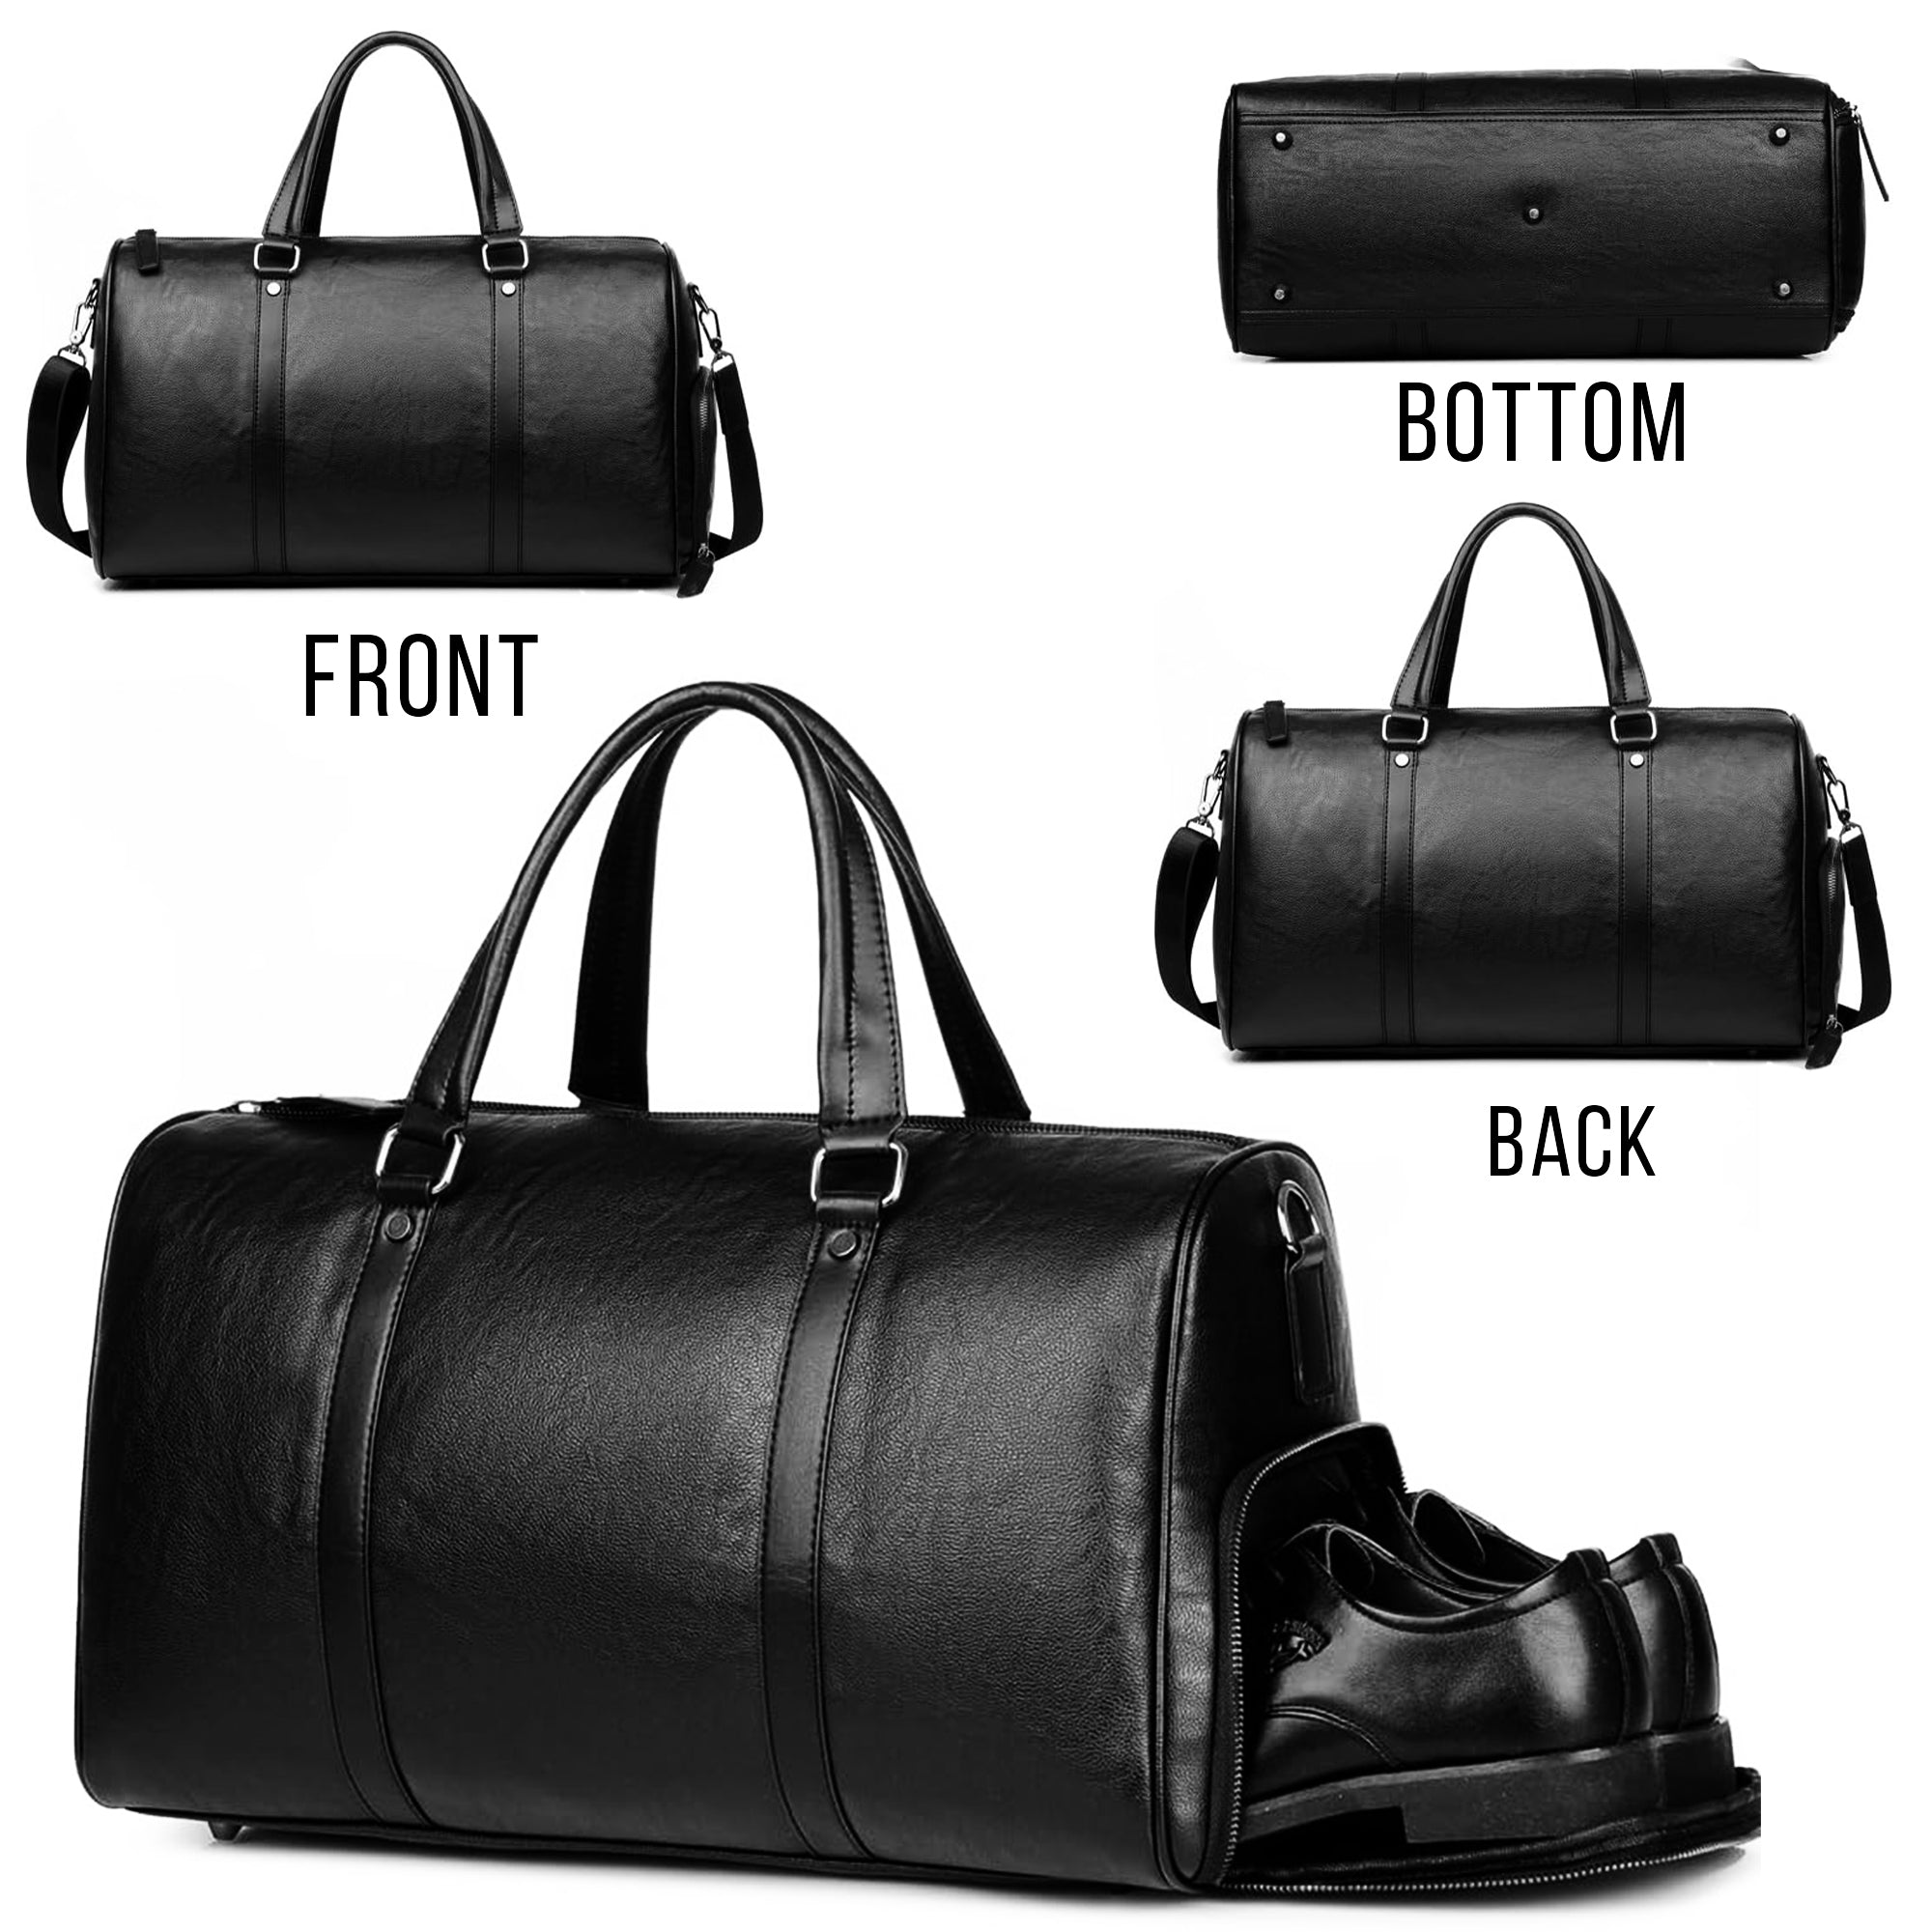 Genuine Leather Duffel Bag Travel Weekender Overnight Luggage Tote Duffle Bags for Men